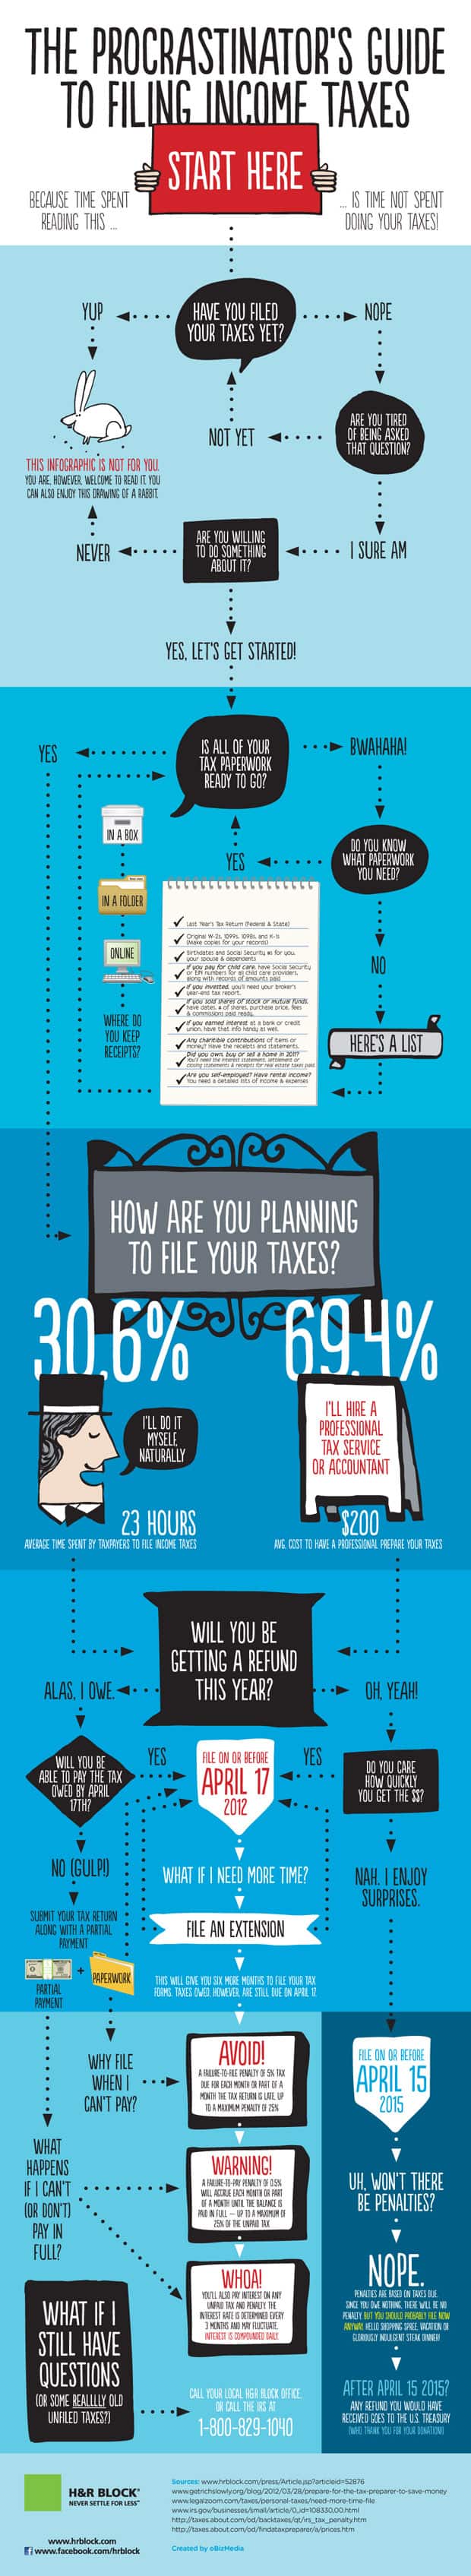 taxes-infographic-hr-block